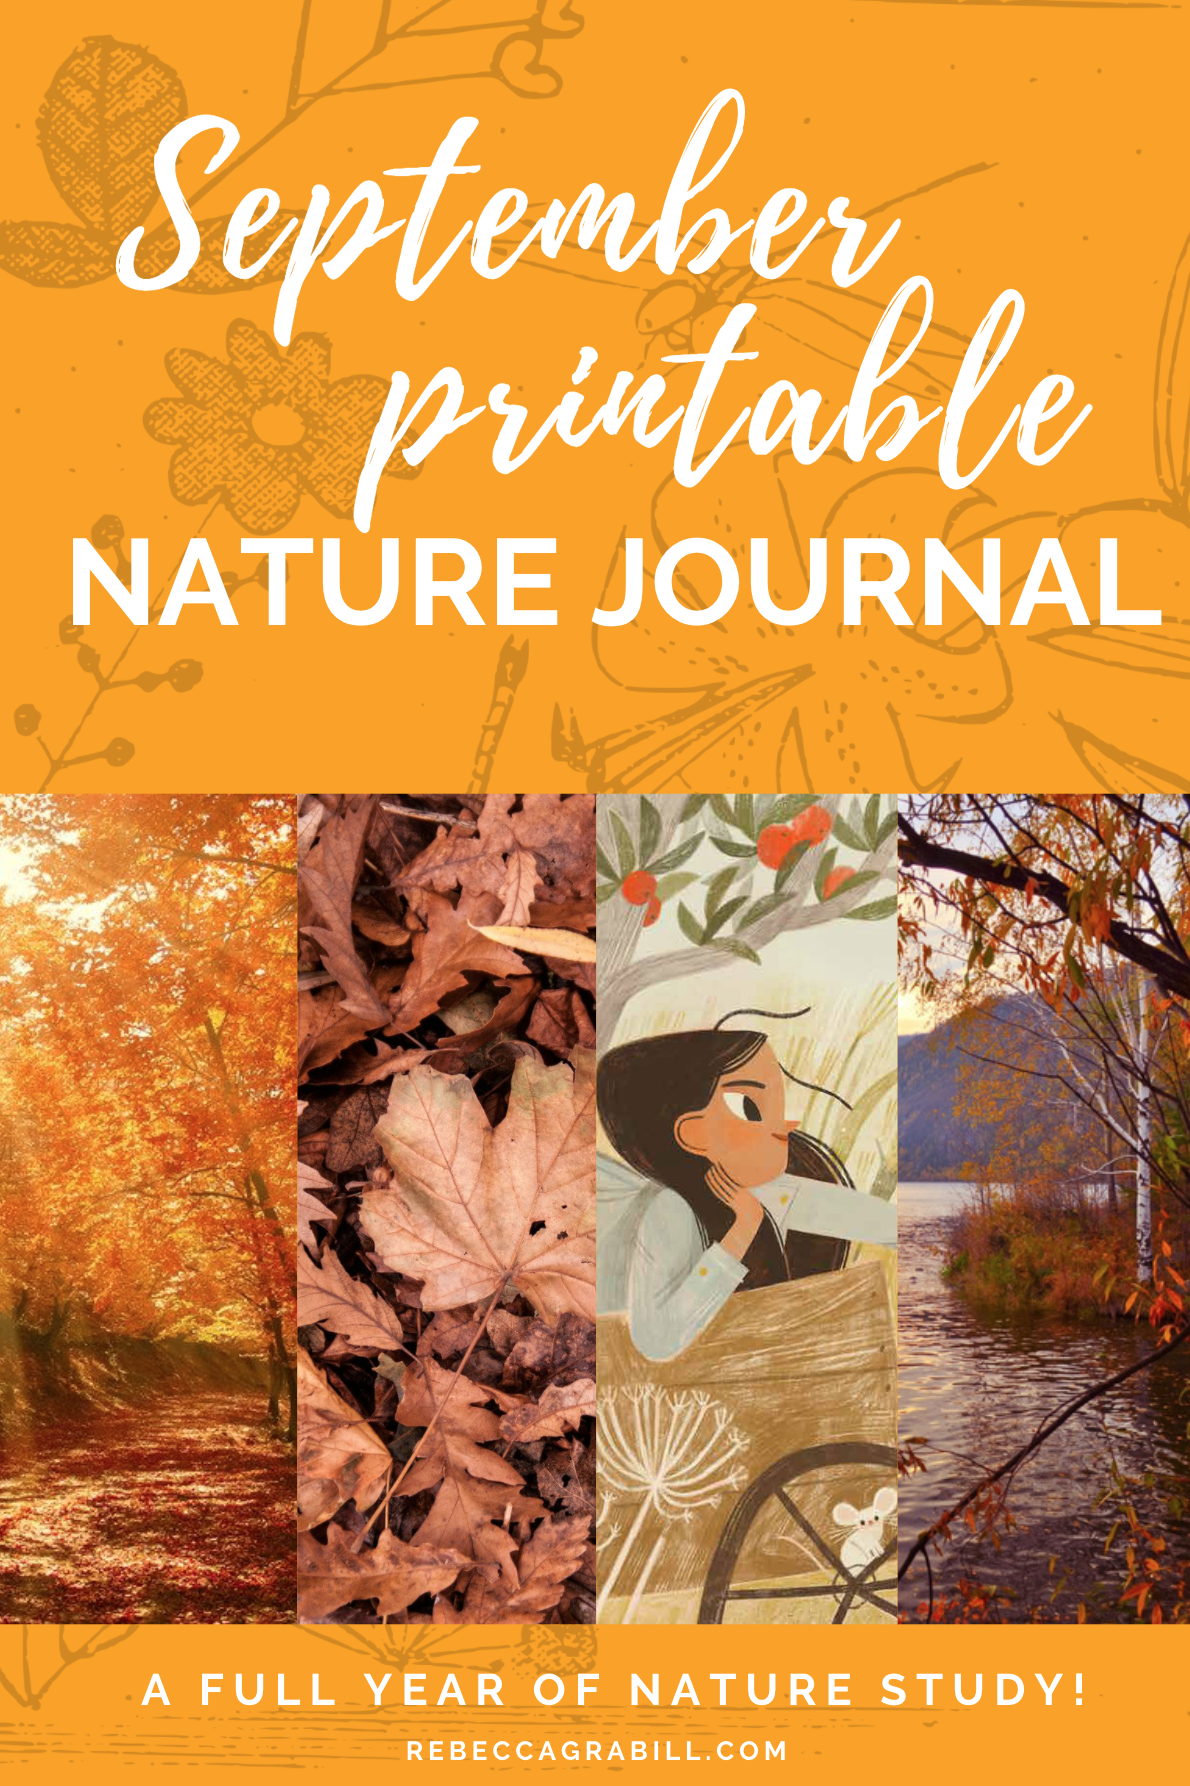 Free Printable Nature Journal Just In Time for September's Back-to-School —  Rebecca Grabill